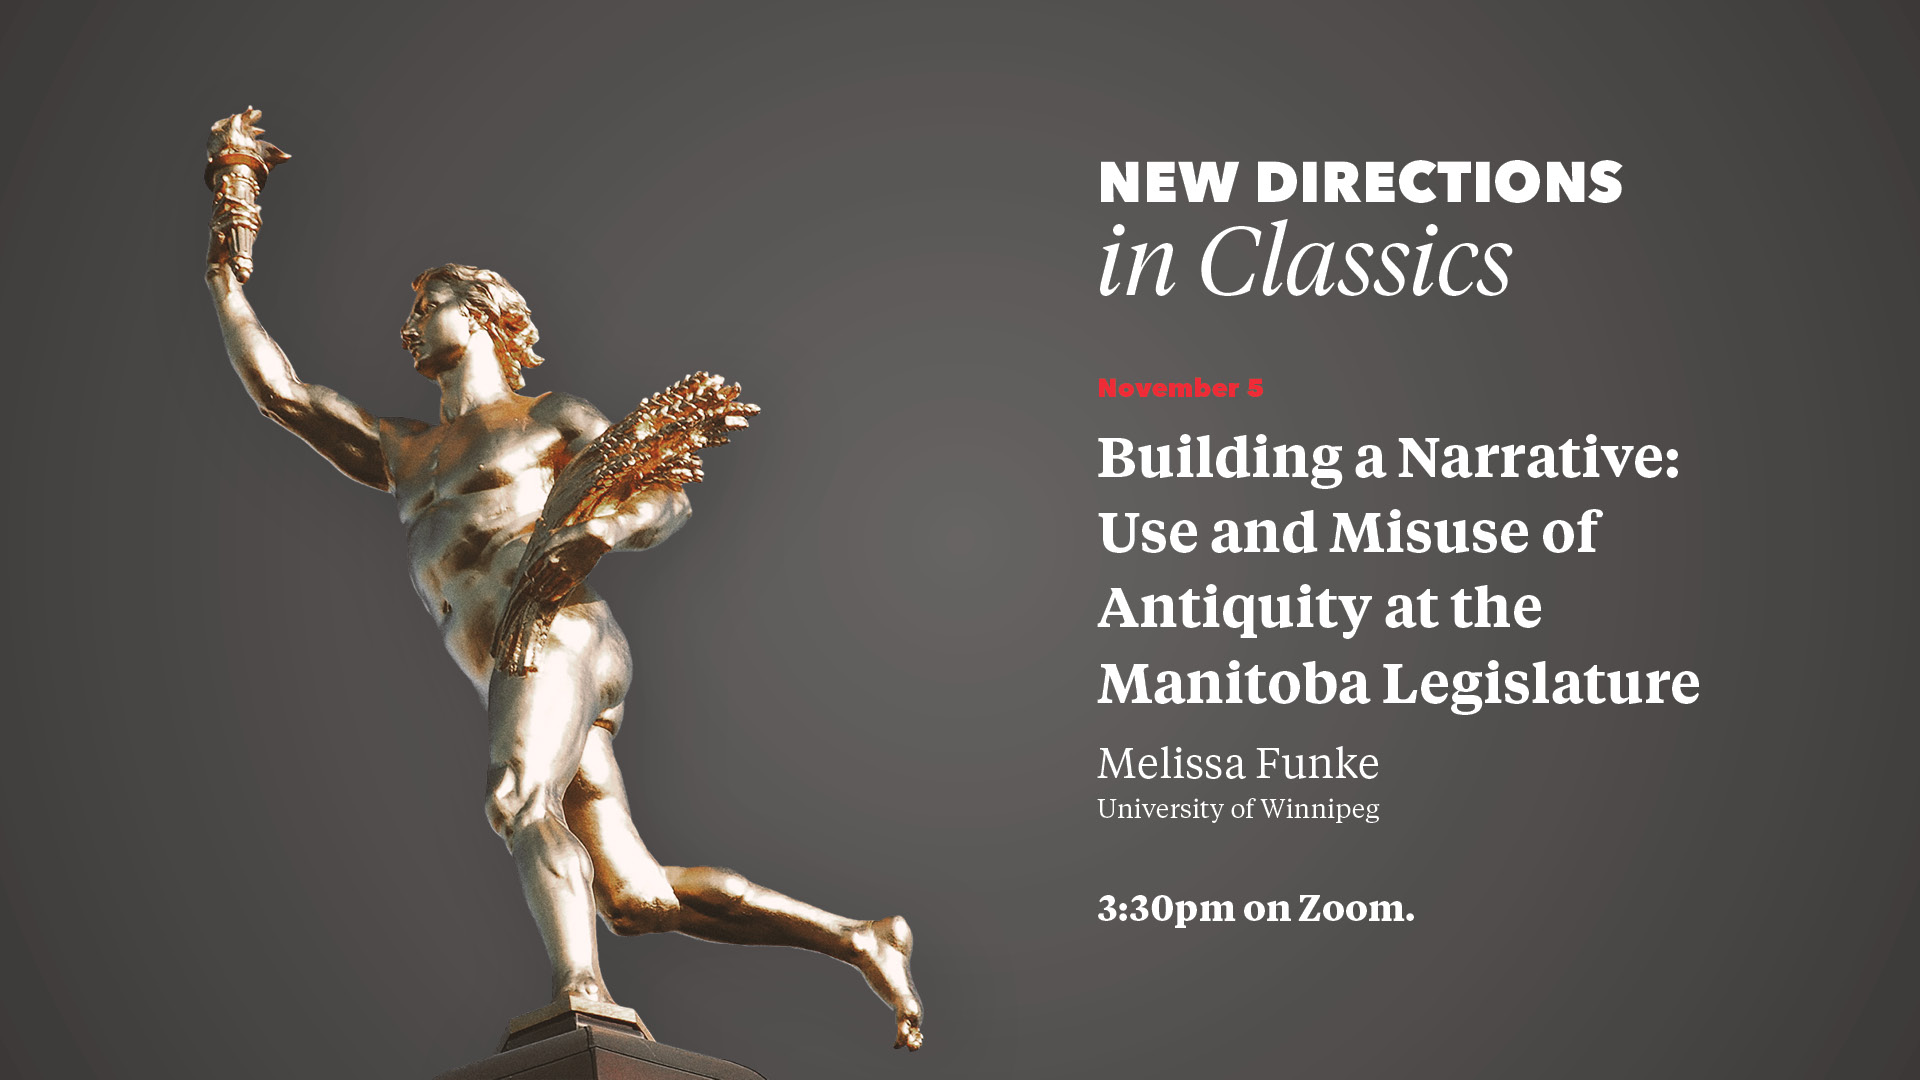 Promo image for New Directions in Classics talk, Nov 5; full text on web page